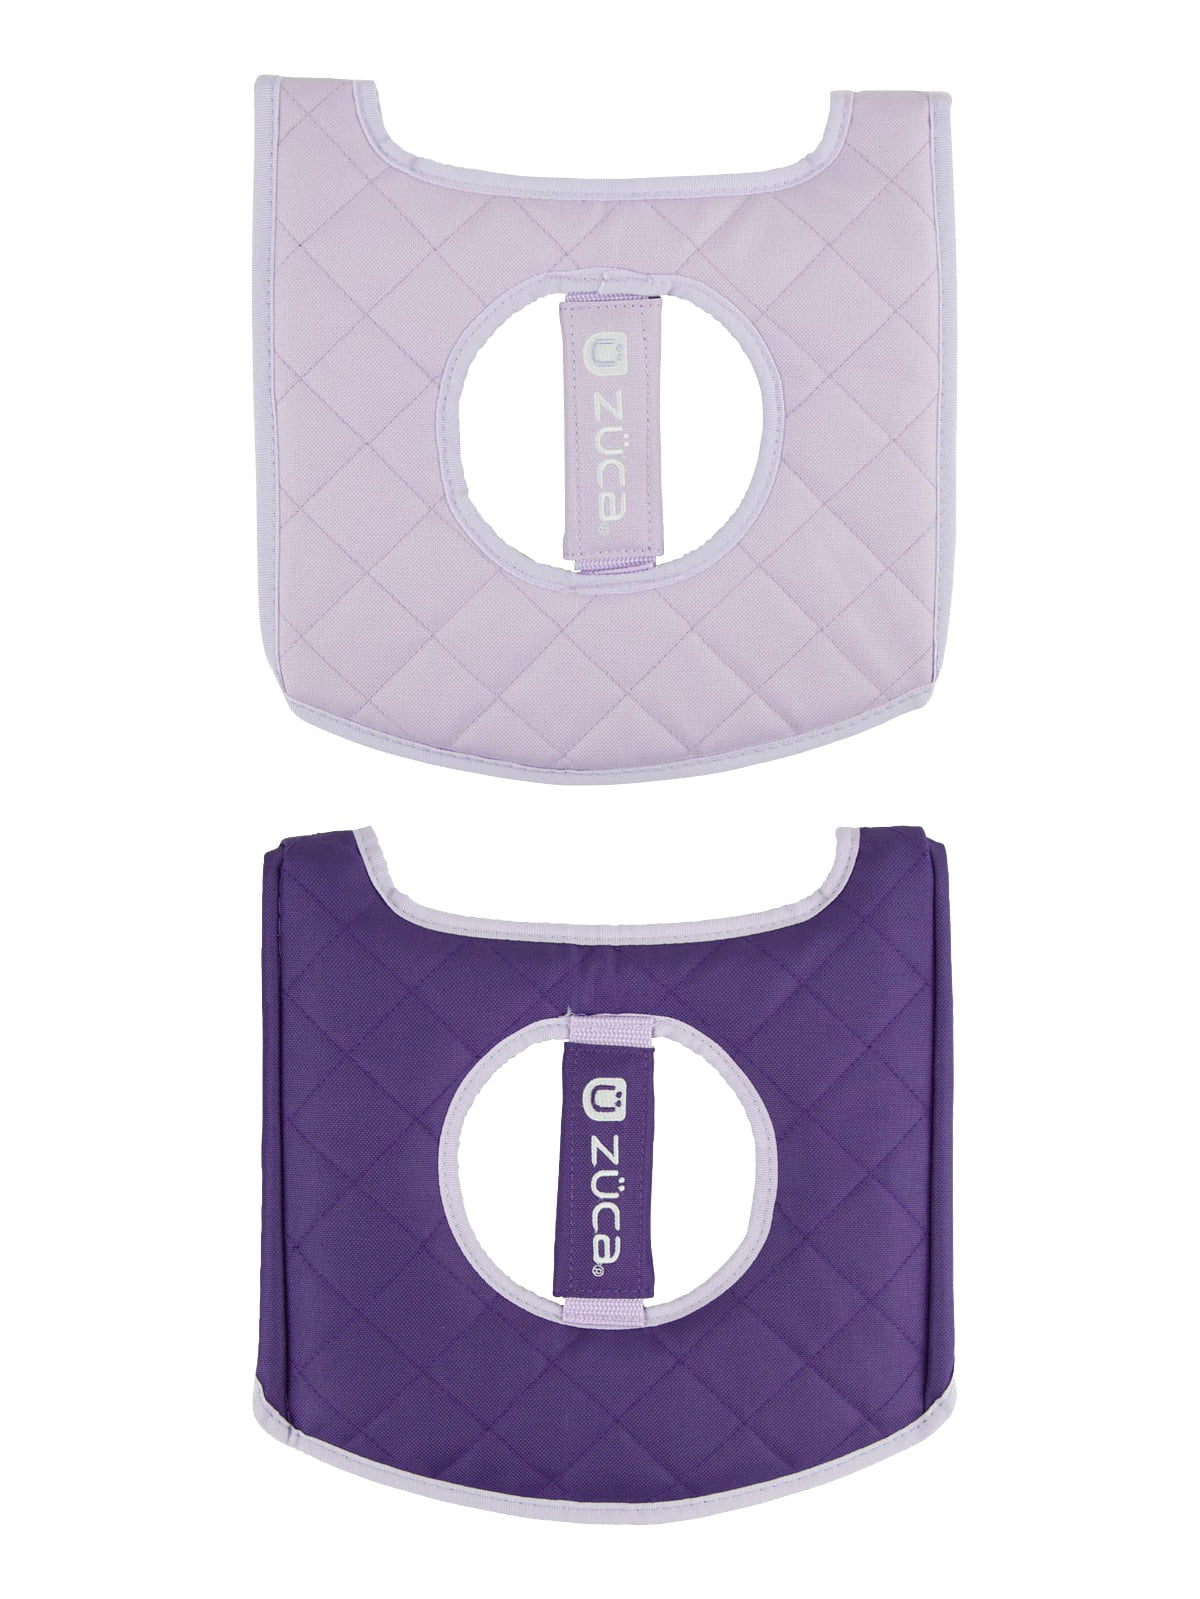 ZUCA Ice Dreamz Sport Insert Bag and Purple Frame with Built-in Seat and Flashing Wheels